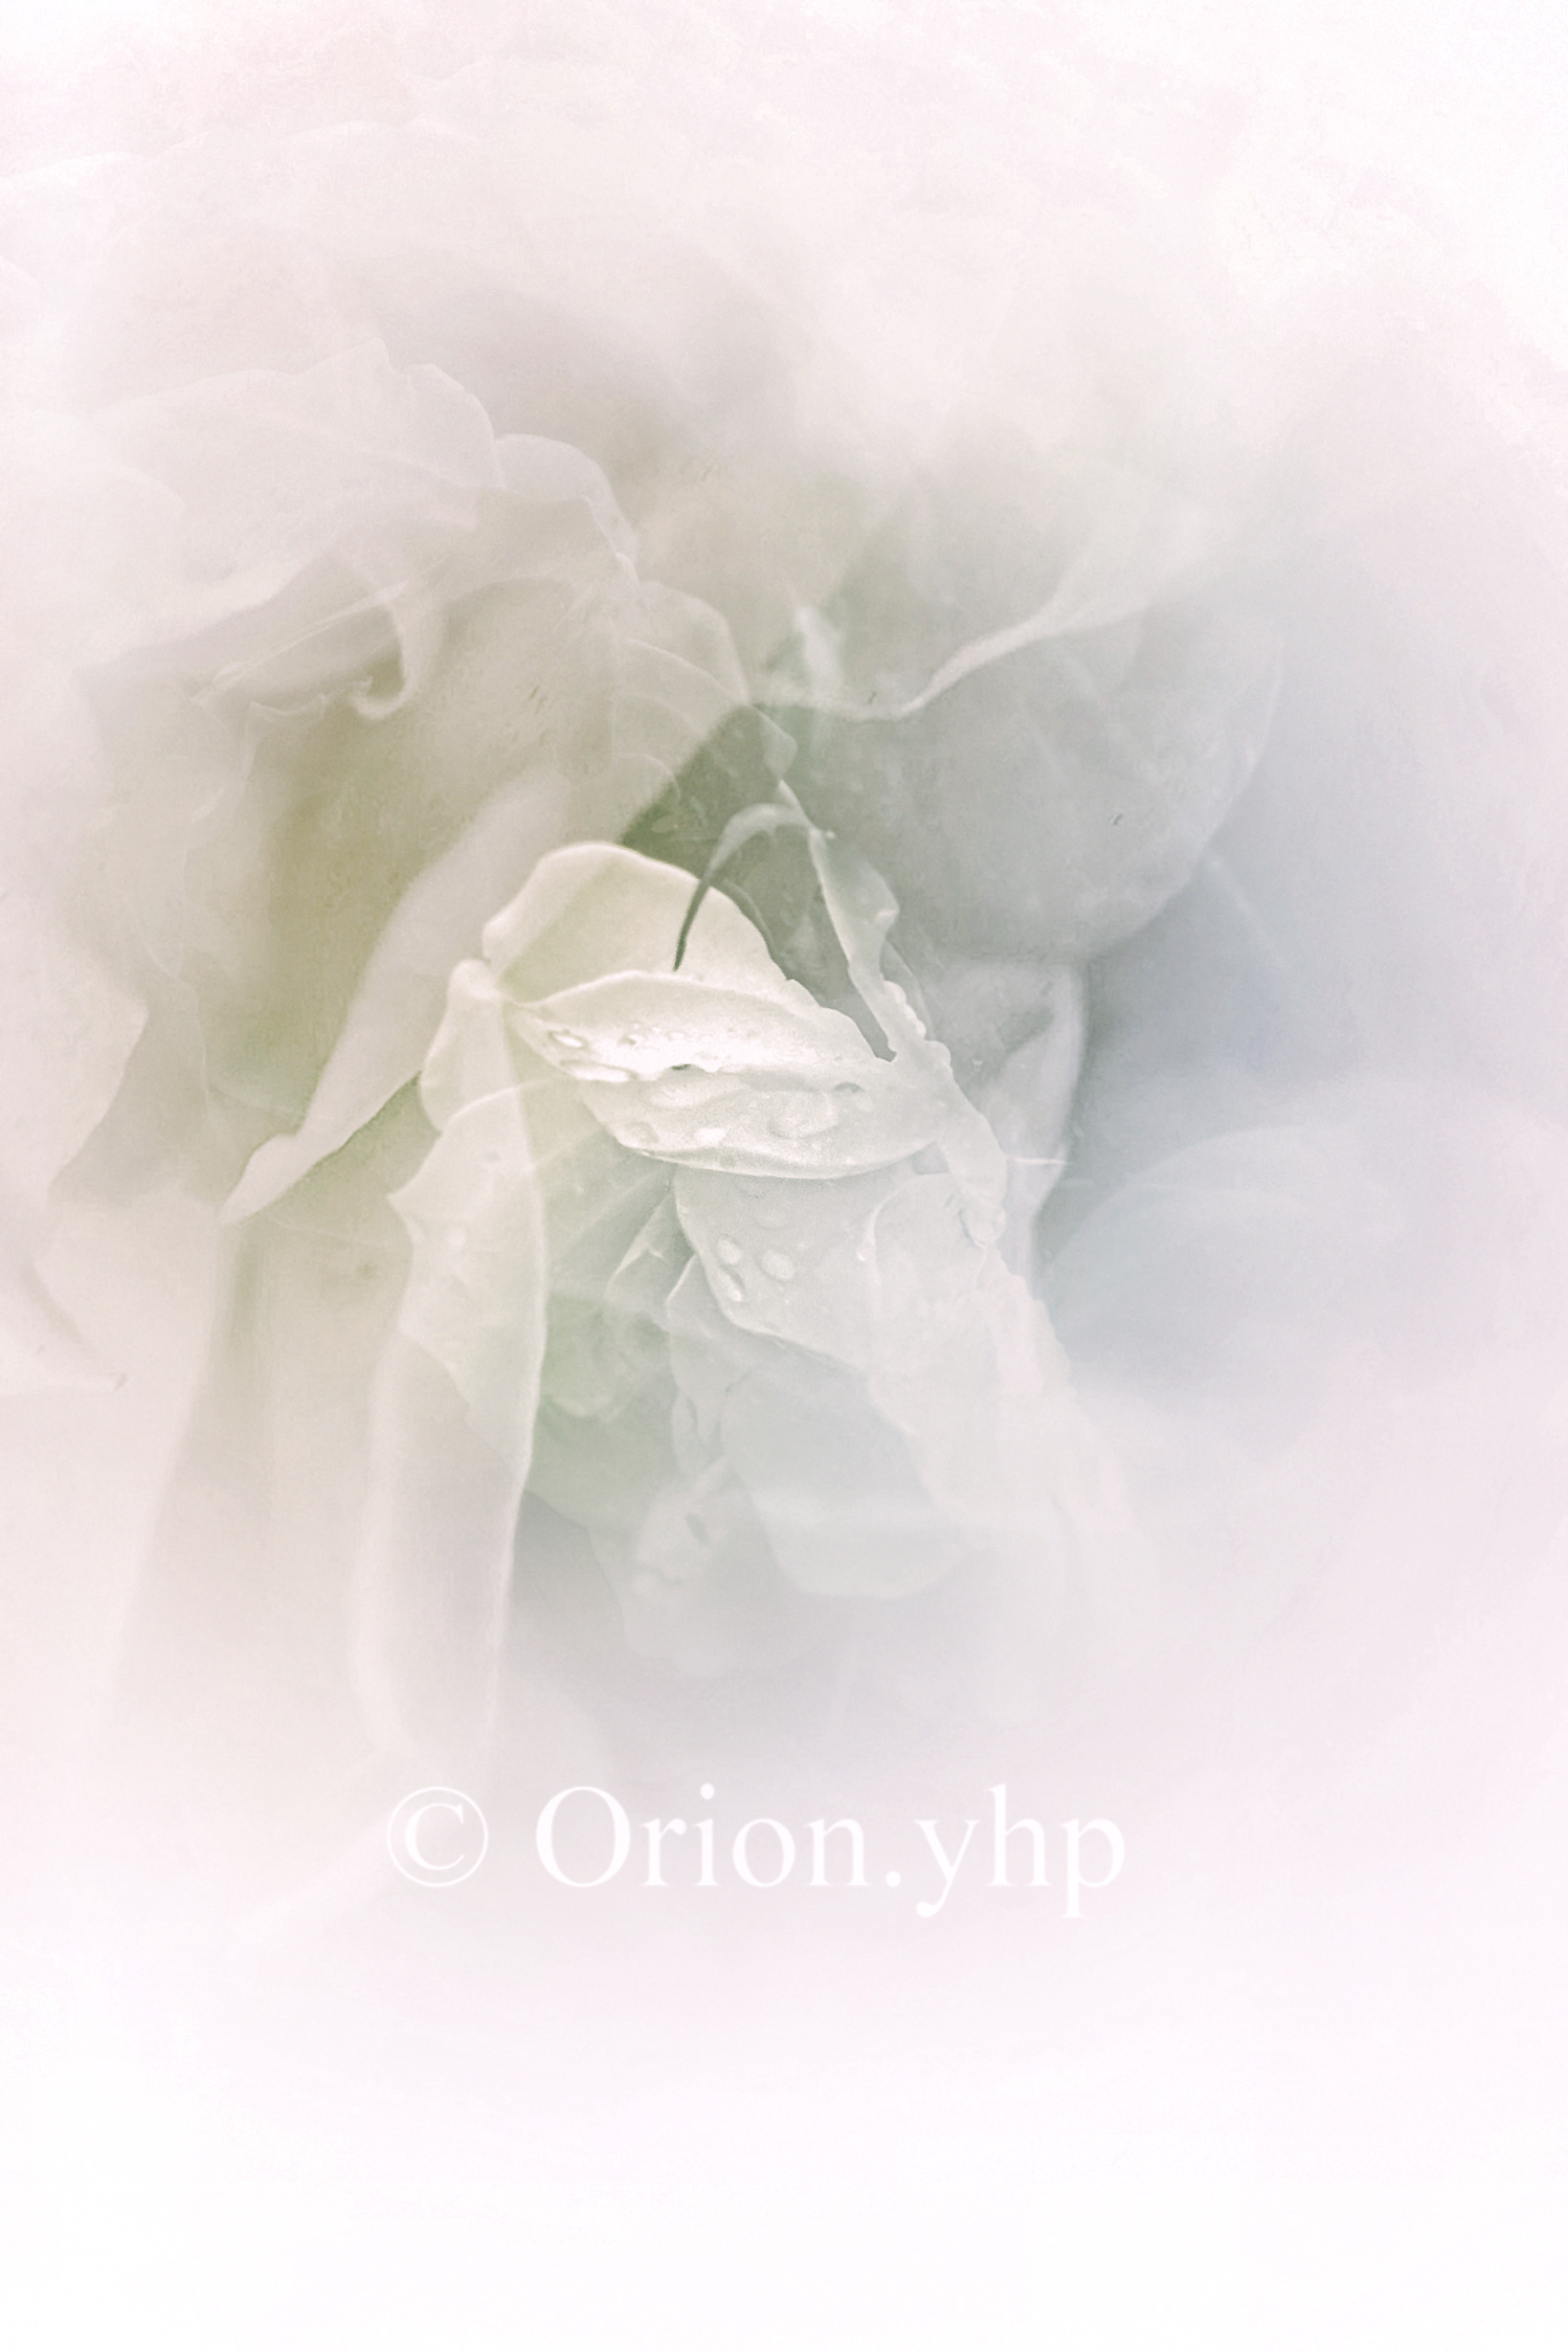 Orion Yhp Raindrops And Rose Petals No 3 薔薇 雨 ファインダー超しの私の世界 Rain Rose Petal Drop Photography C Orion Yhp T Co Tkwye7wrya Twitter